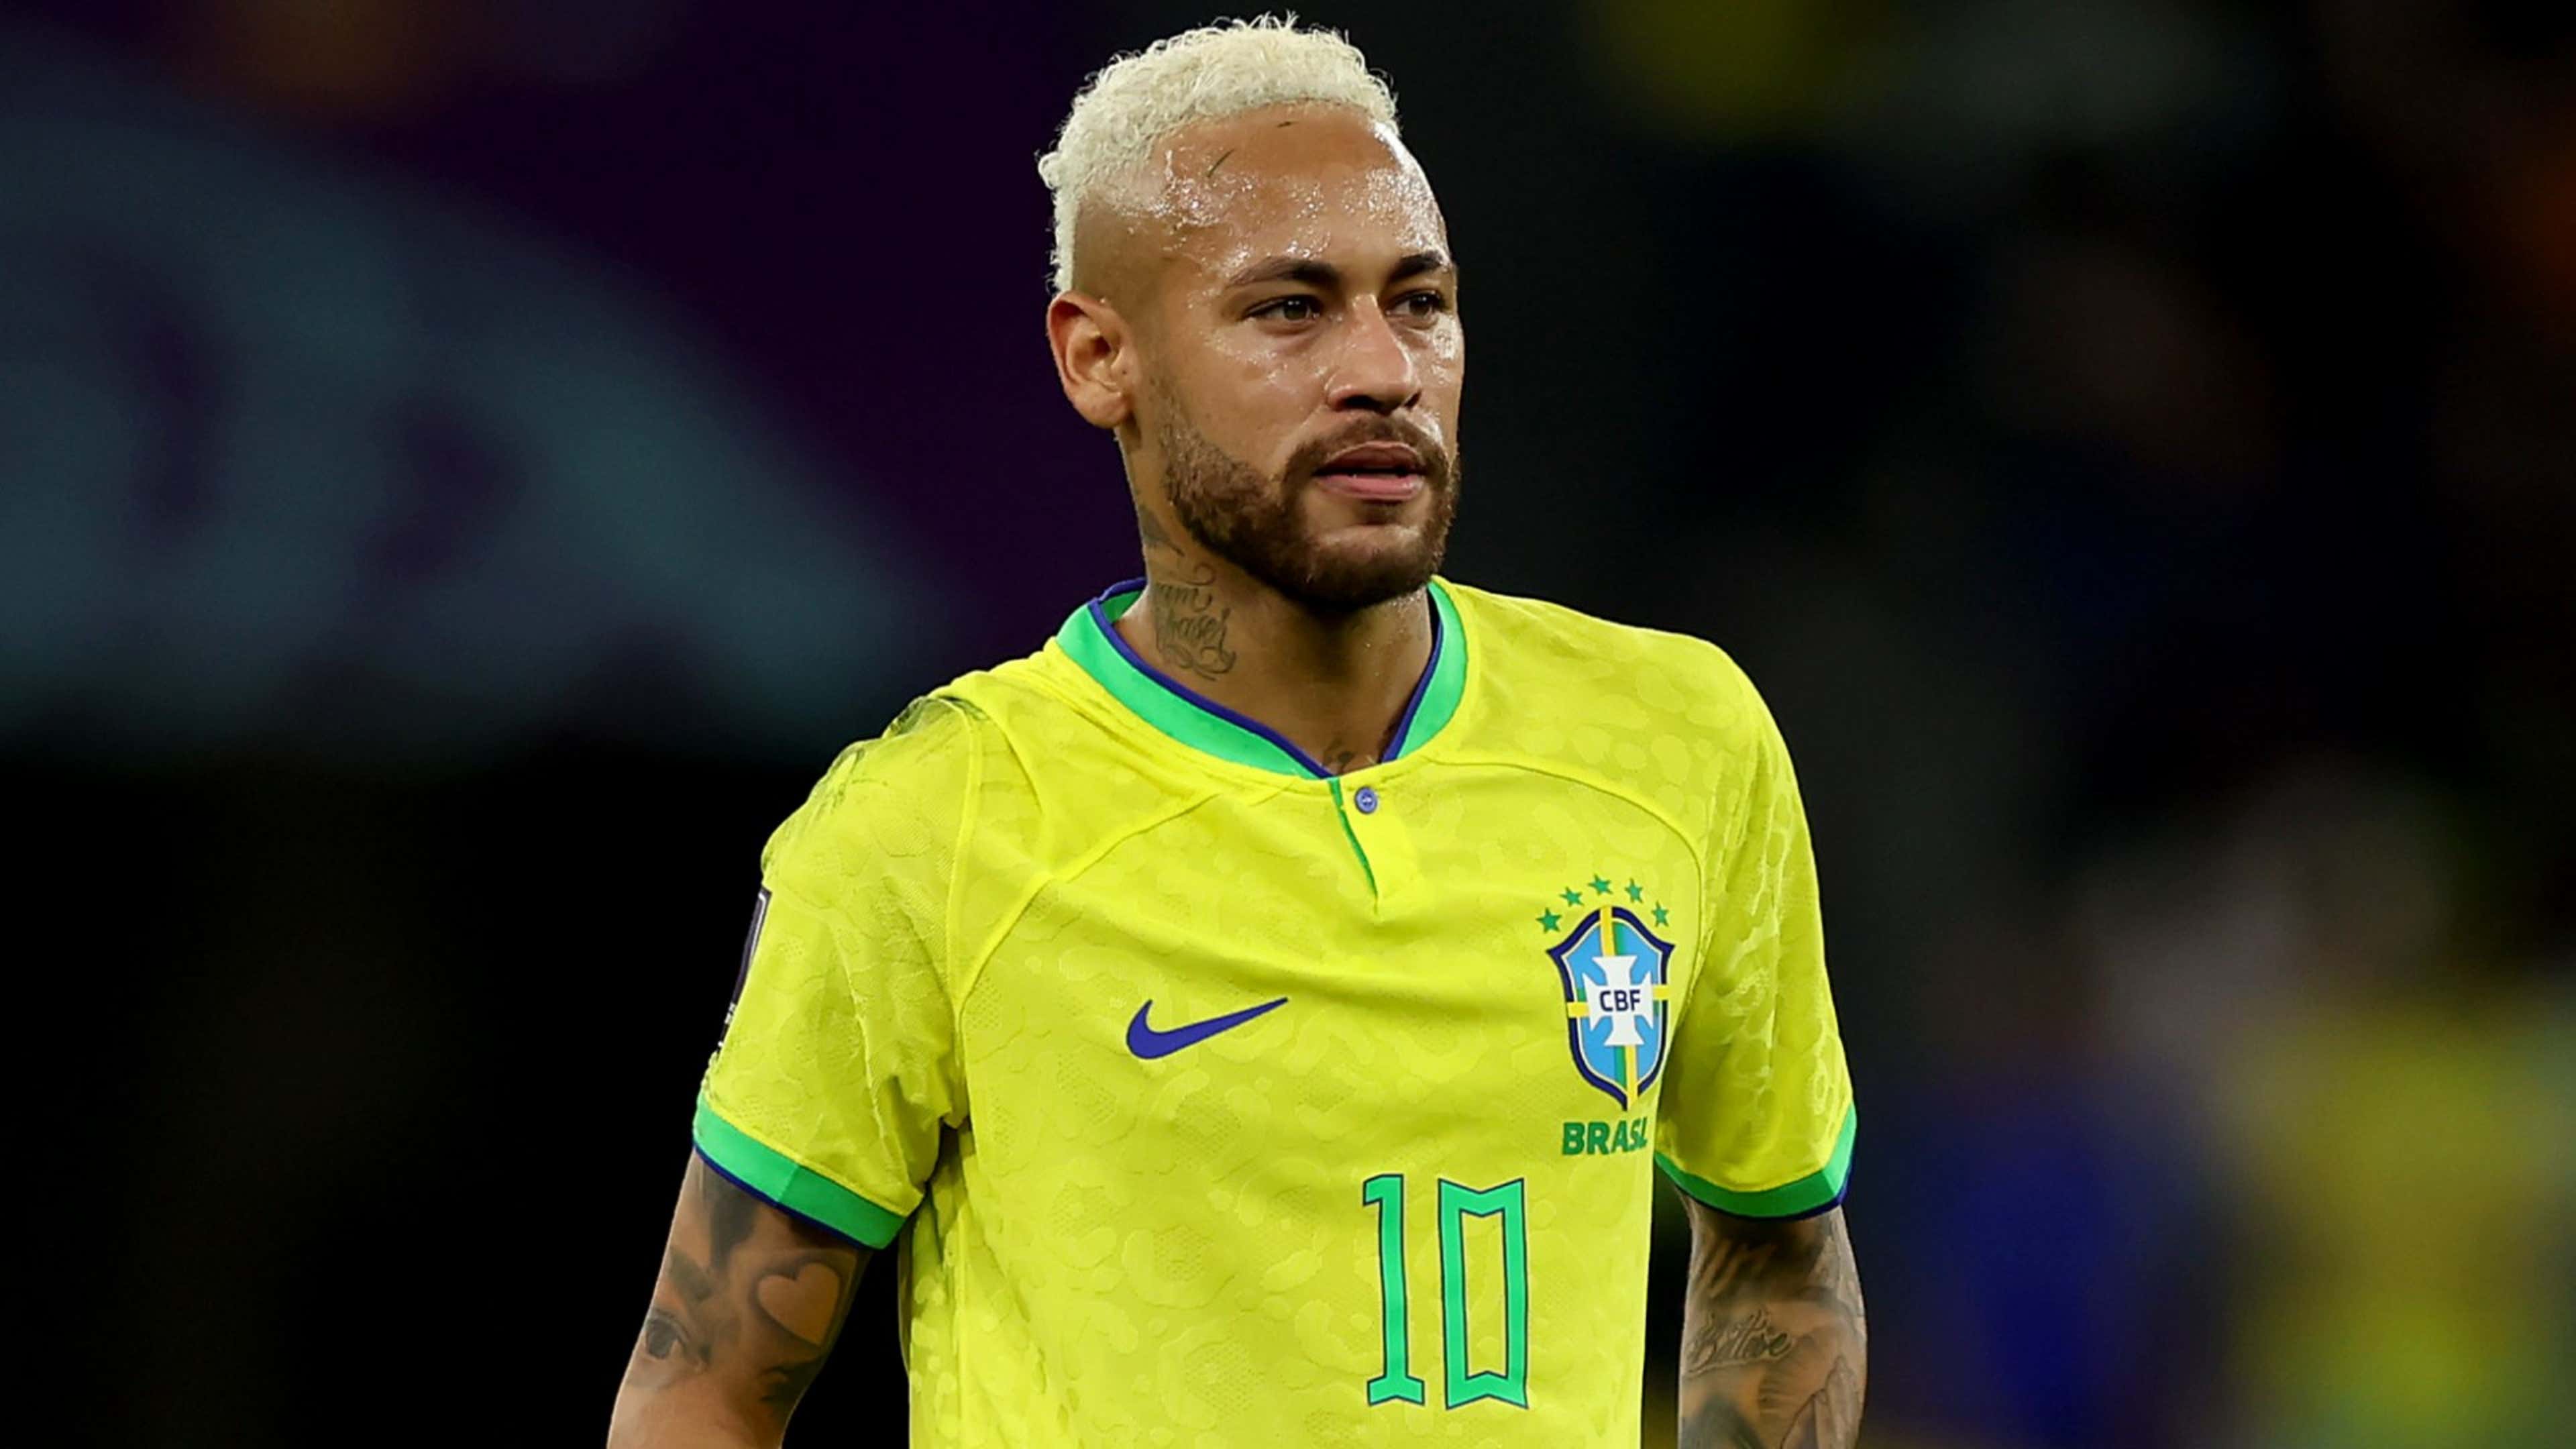 It surely would have been something to see Neymar Jr. ball out at Stamford Bridge.